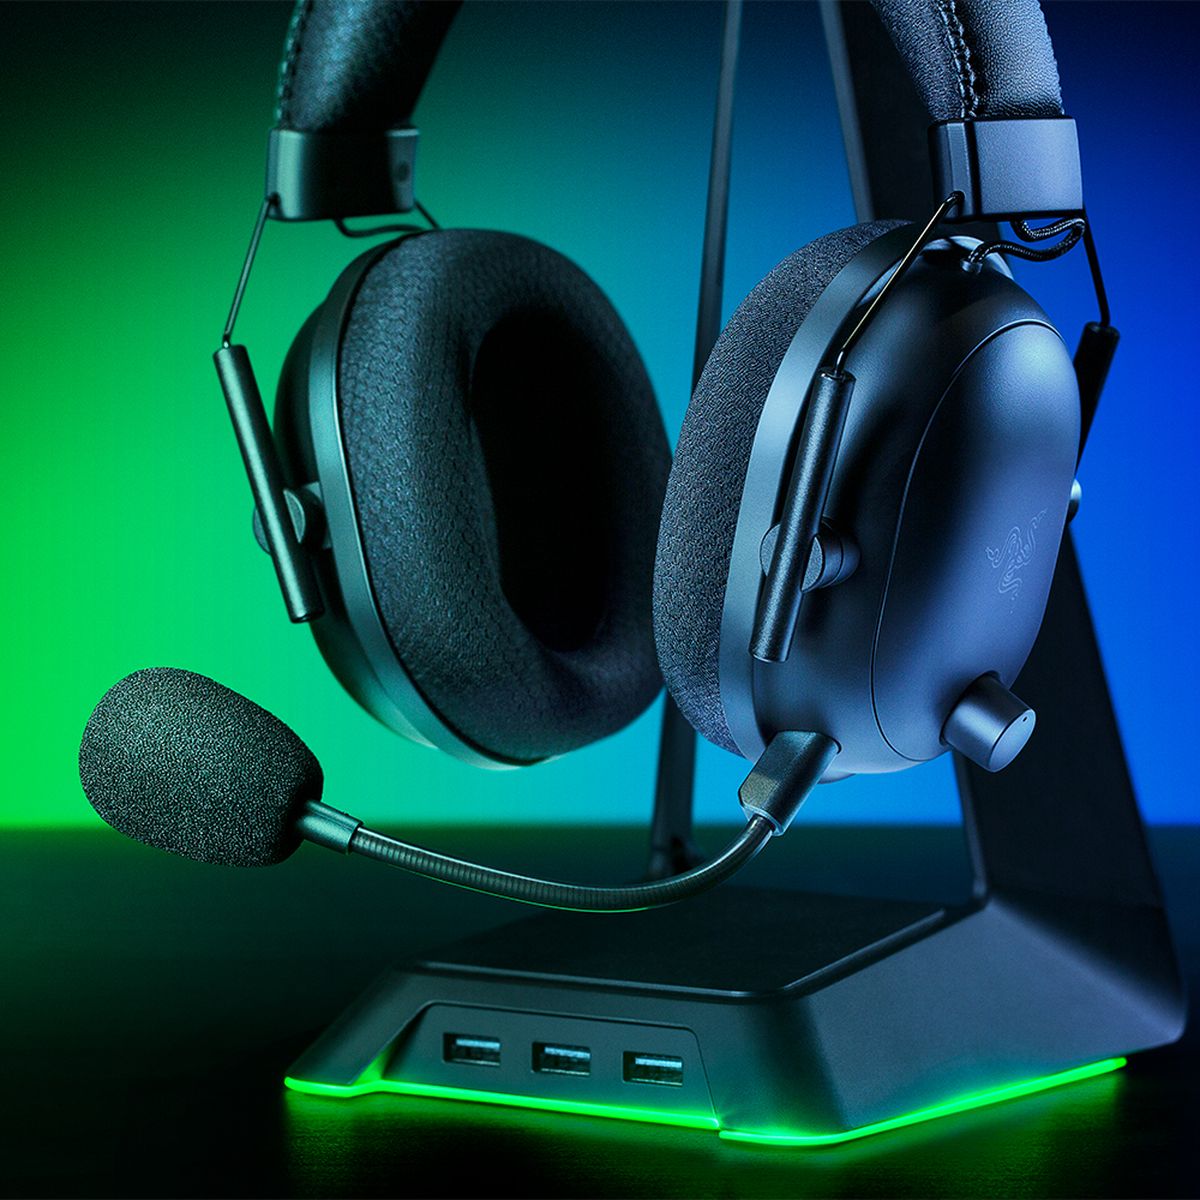 Auriculares gaming - GXT 488 Forze PS4 TRUST, Supraaurales, Azul